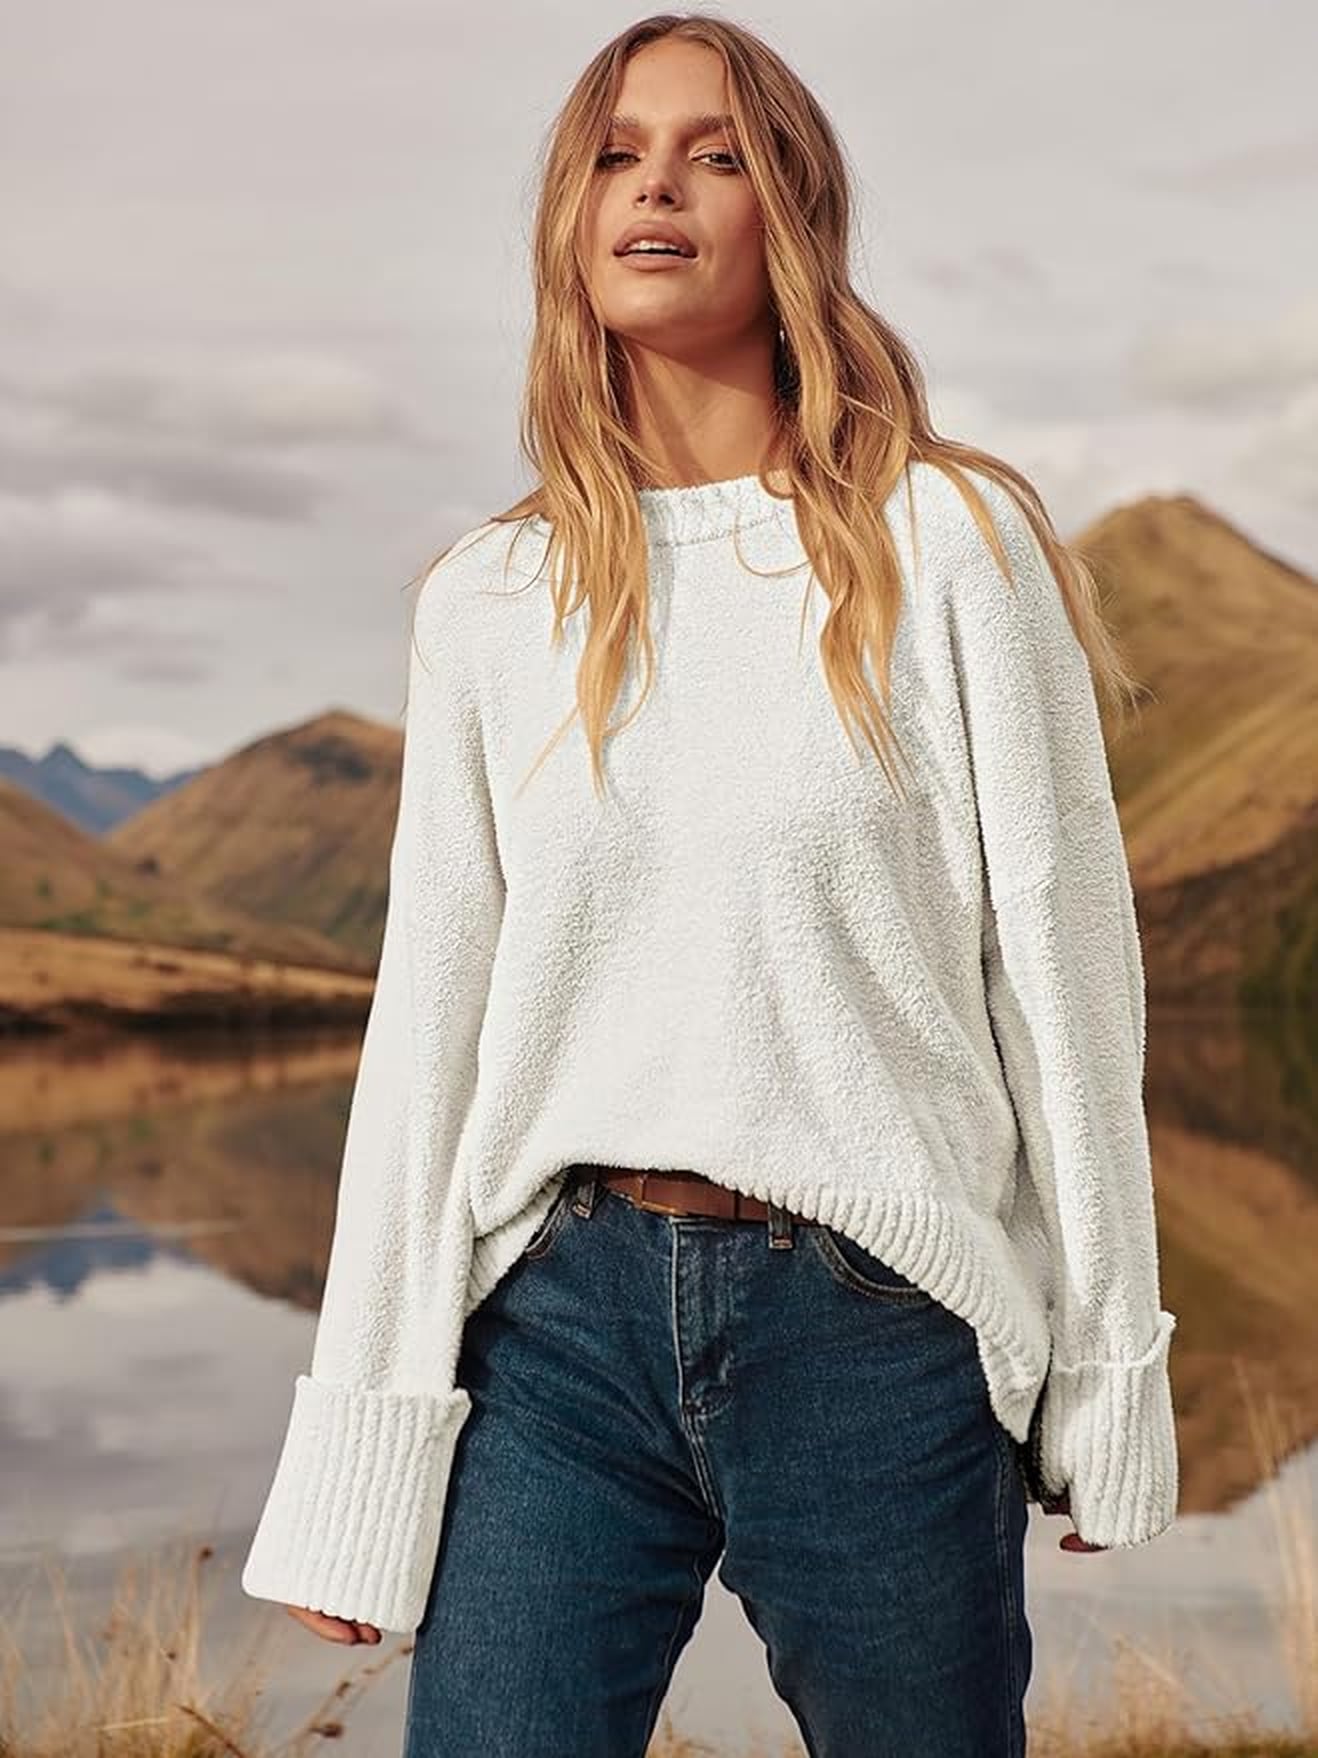 The Best Amazon Fashion Sweaters to Shop For Fall | POPSUGAR Fashion